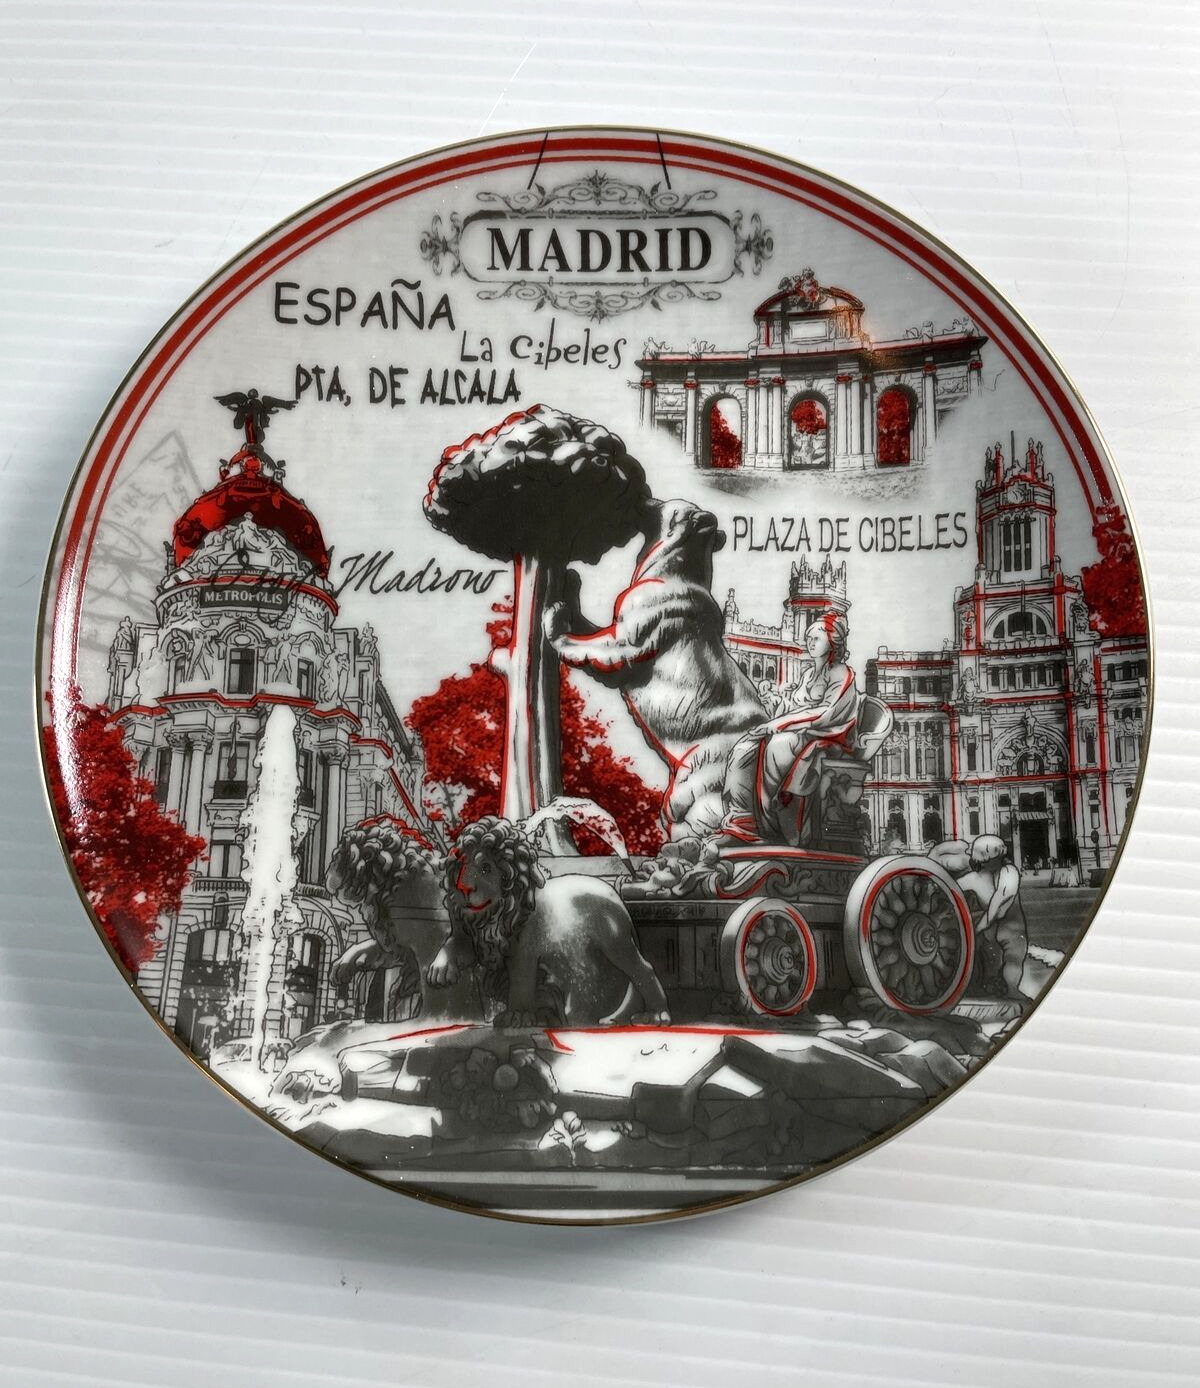 Collectors Plate Souvenir Plate Madrid Spain 8” Diameter w Stand White Black Red